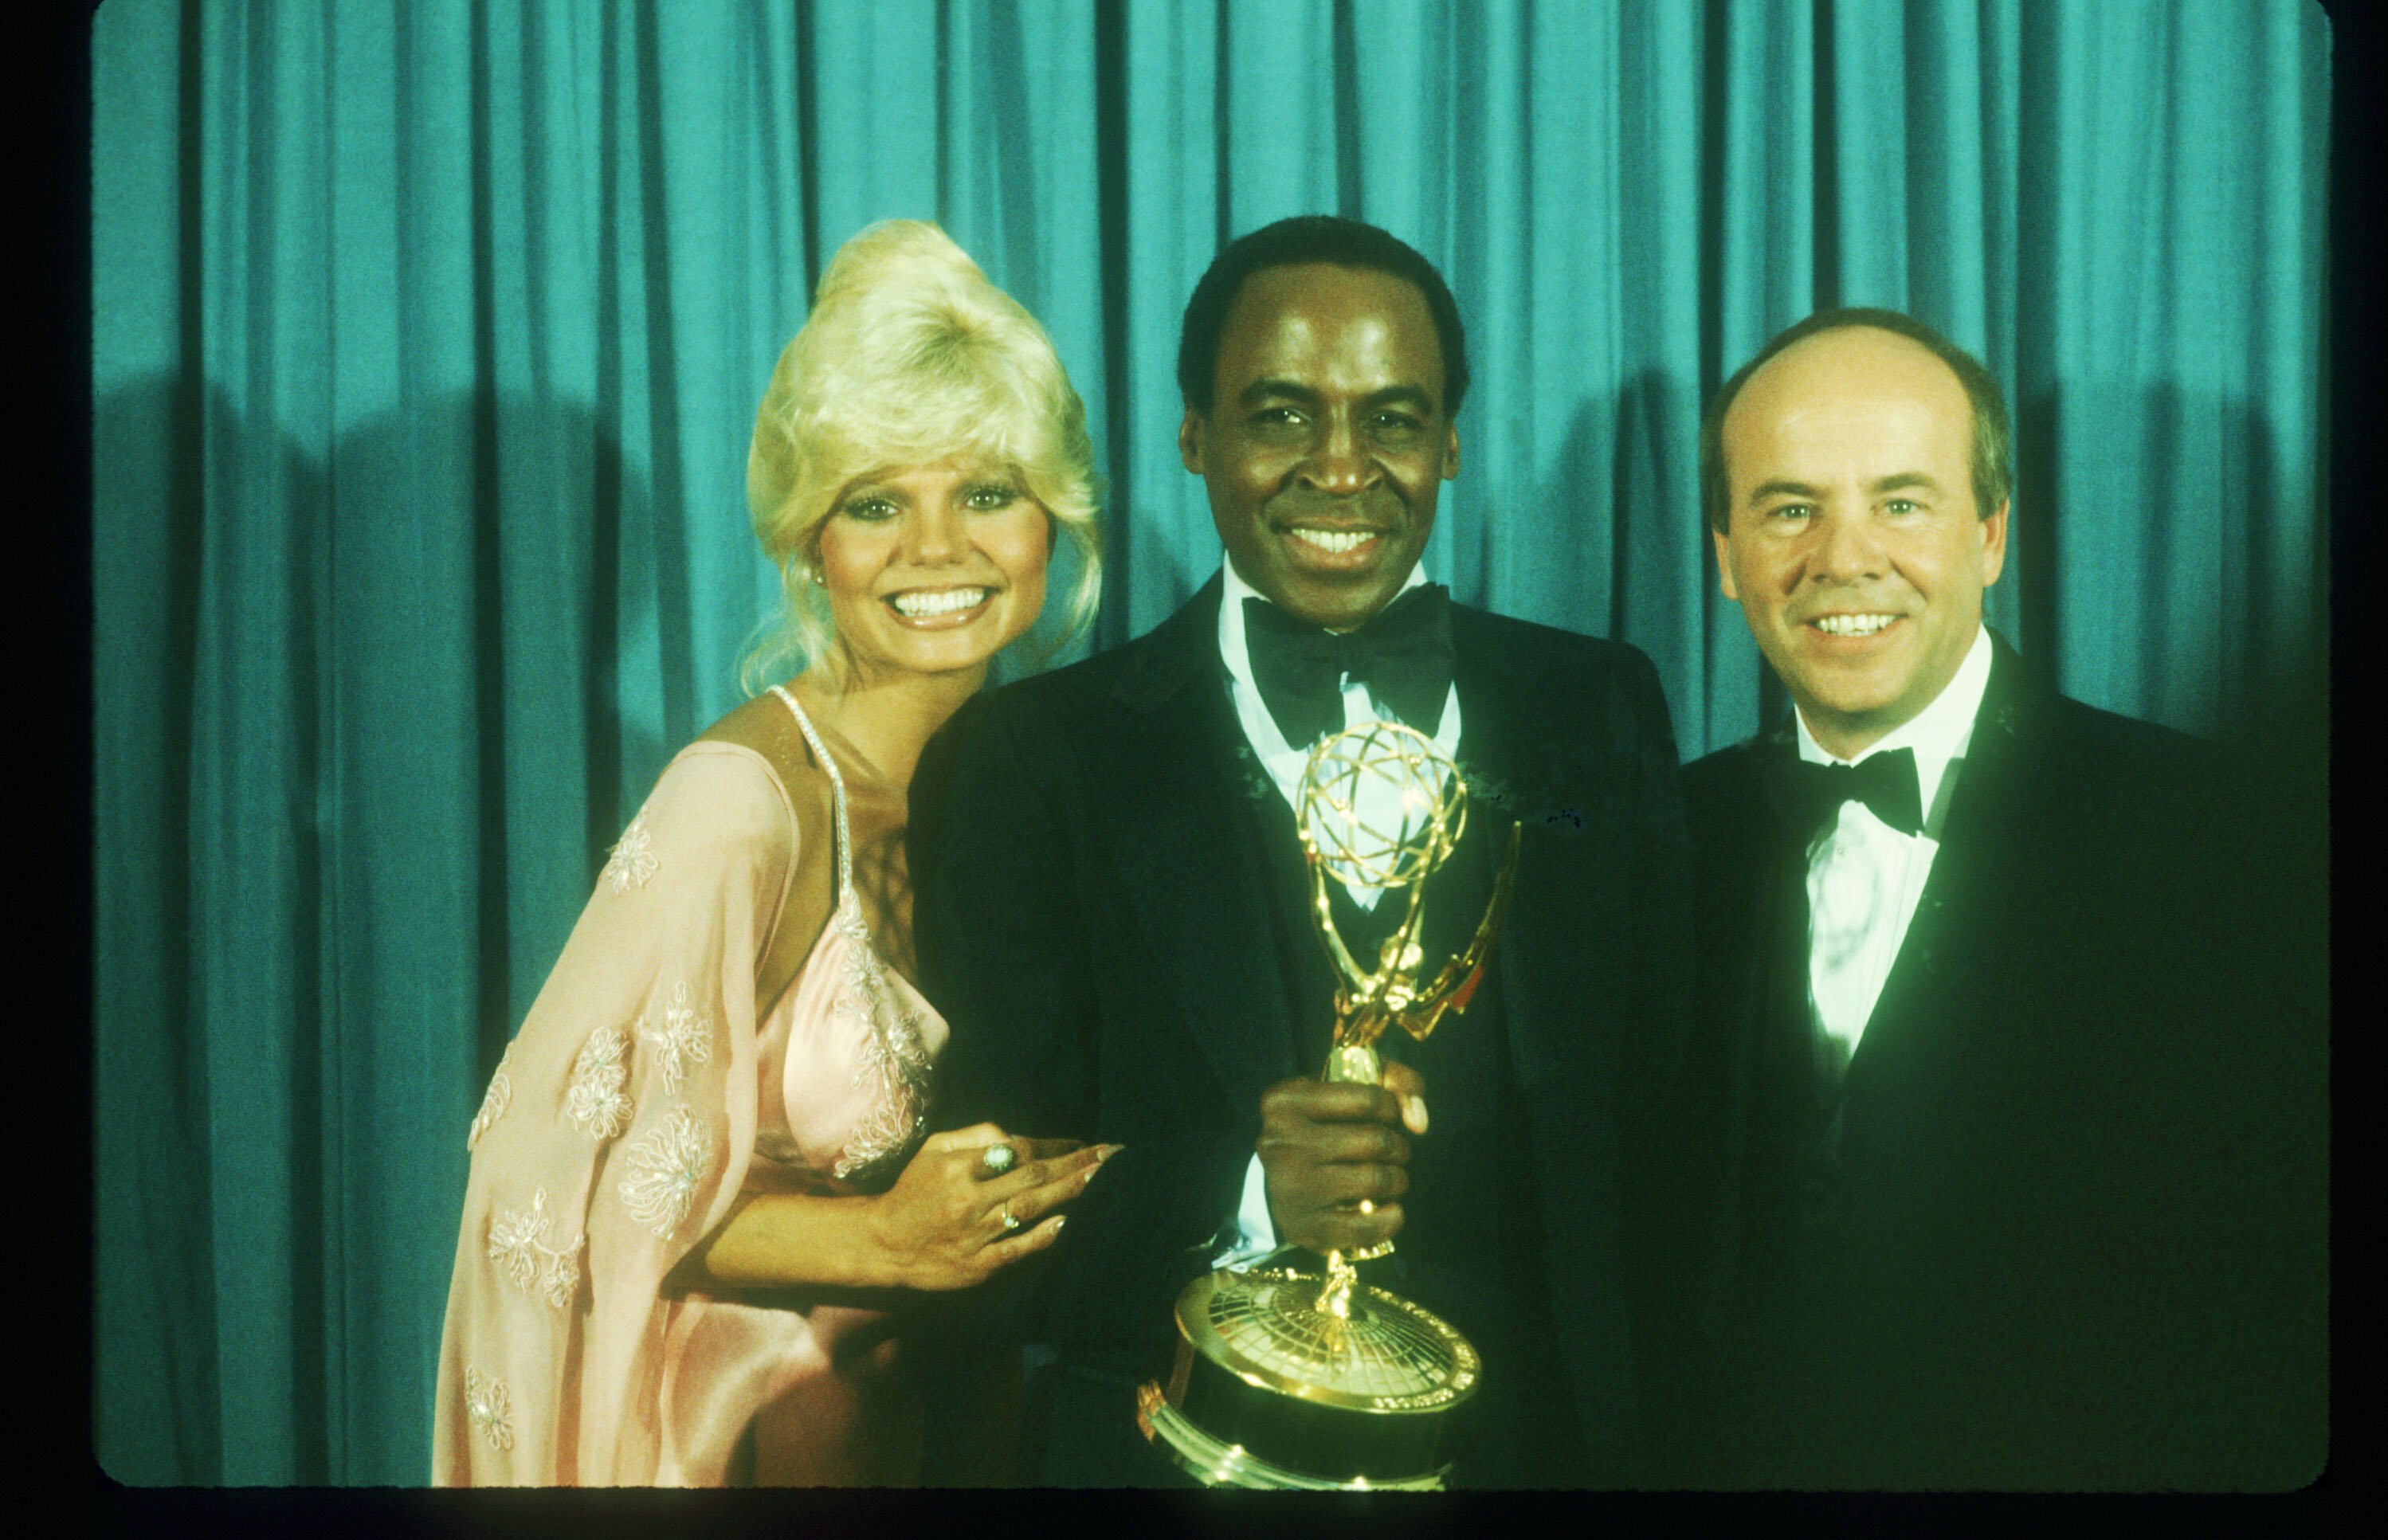 Loni Anderson, Robert Guillaume, and Tim Conway pose for a picture August 1979 after he won the Emmy for his role as Benson on the TV show 'soap.'' | Source: Getty Images